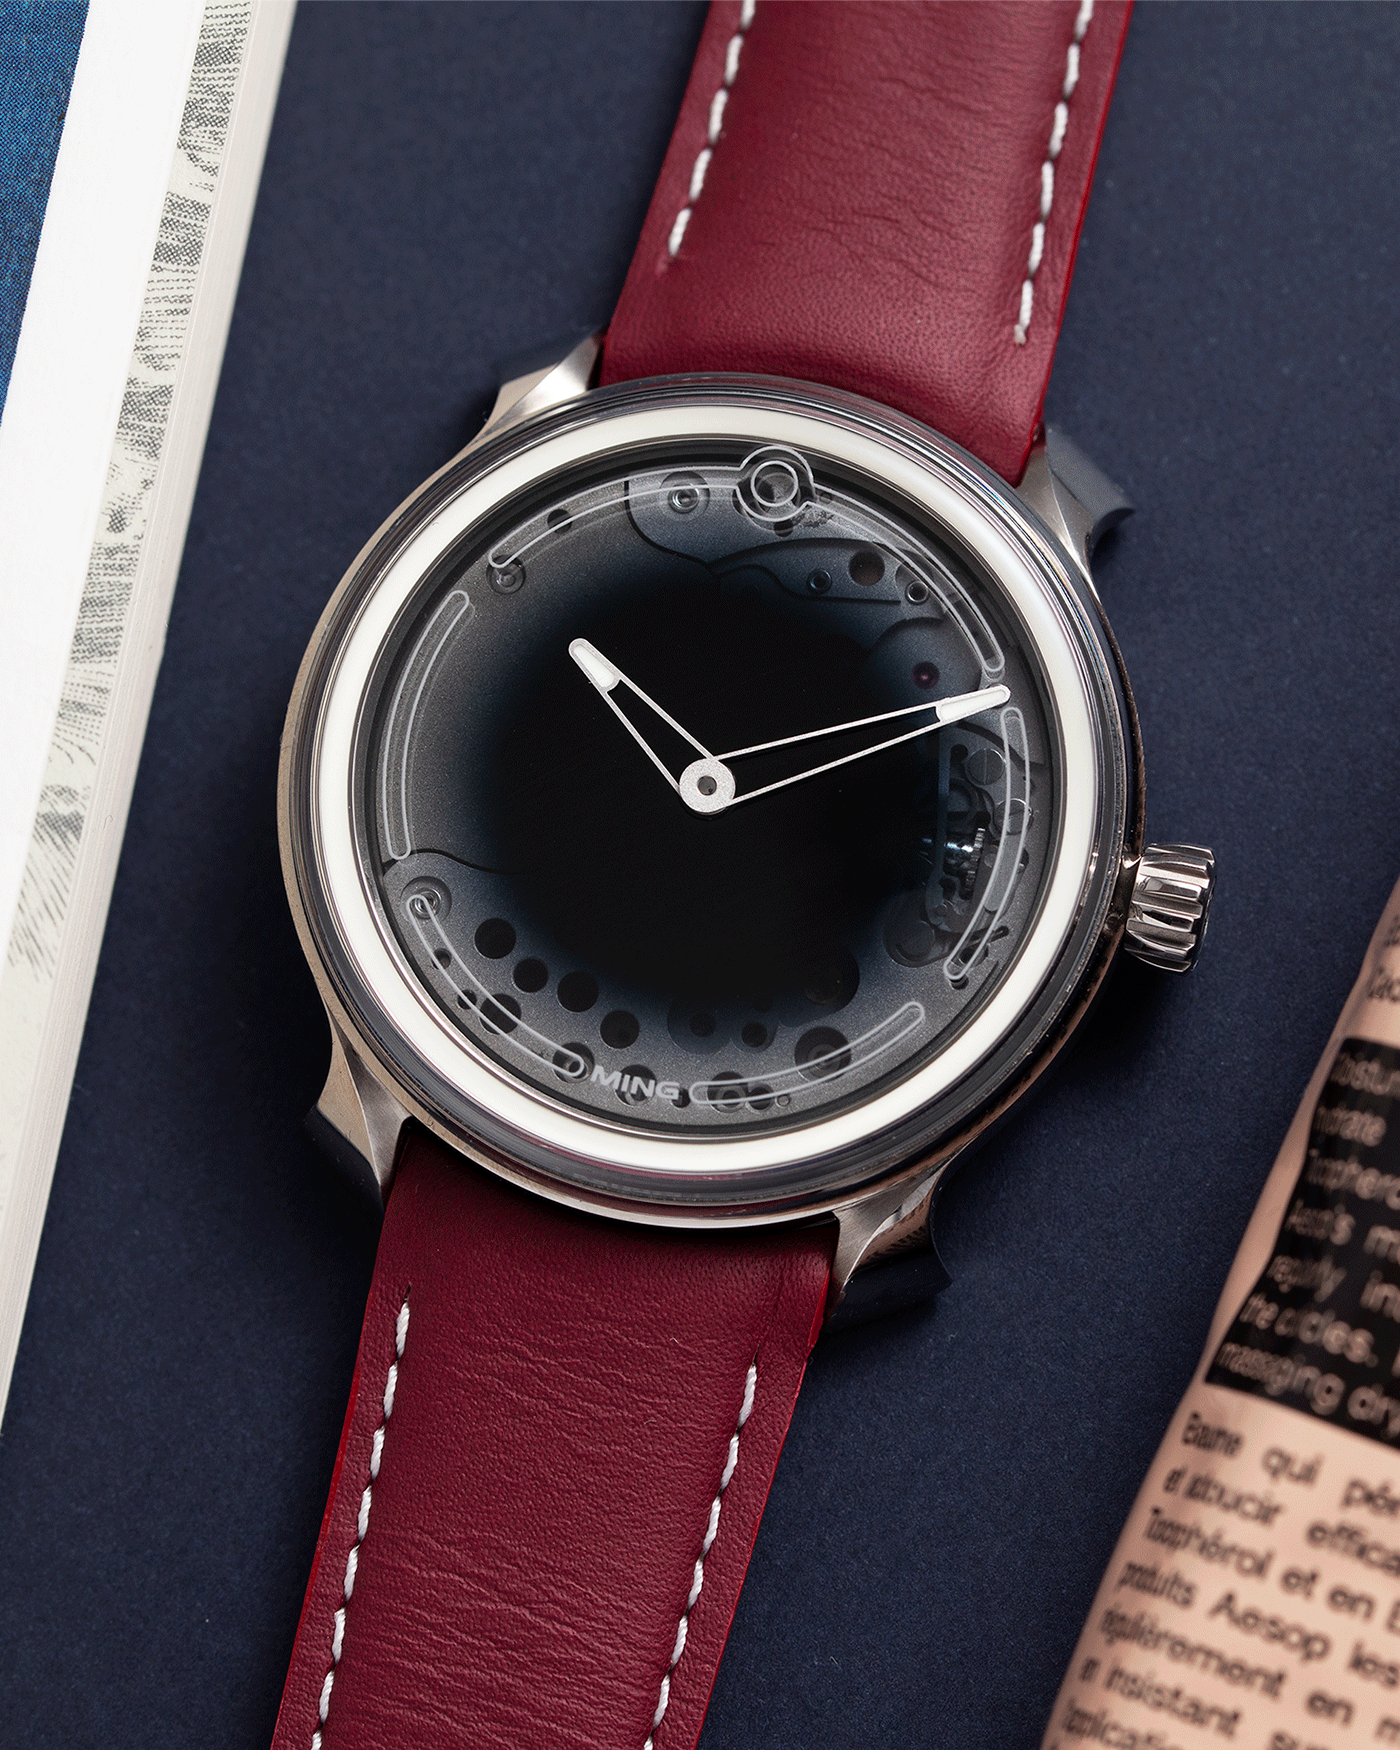 Brand: Ming Year: 2017 Model: 19.01 Material: Grade 5 Titanium Movement: Schwarz-Etienne for MING Cal. MSE100.1 Case Diameter: 39mm Strap: Ming / Jean Rousseau Red Leather StrapBrand: Ming Year: 2017 Model: 19.01 Material: Grade 5 Titanium Movement: Schwarz-Etienne for MING Cal. MSE100.1 Case Diameter: 39mm Strap: Ming / Jean Rousseau Red Leather Strap